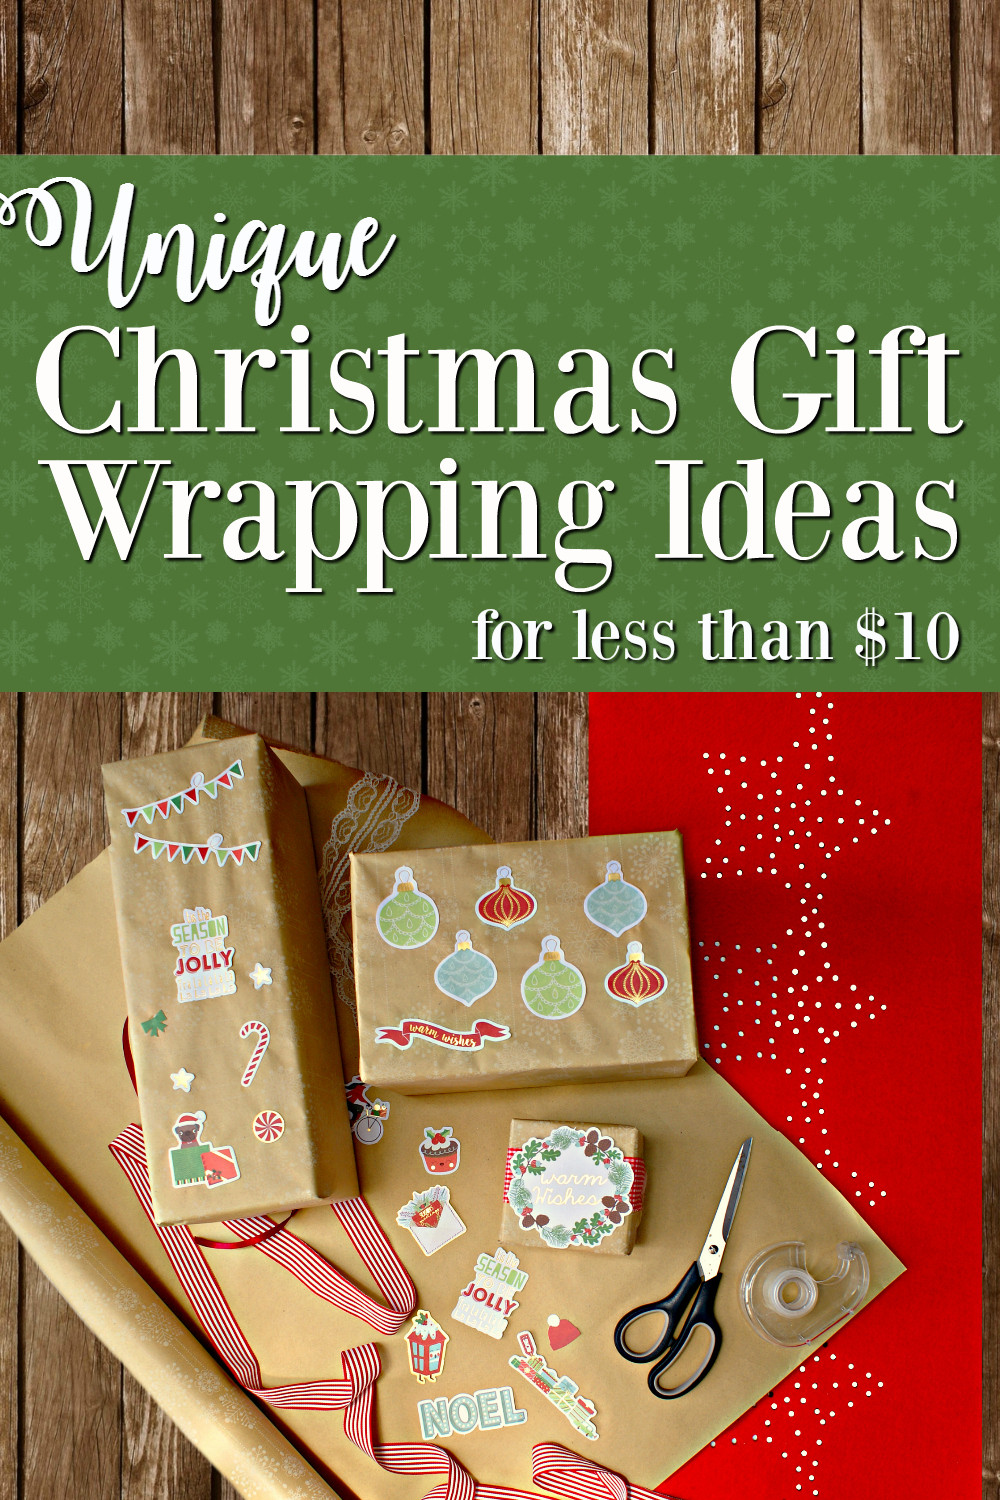 Cool Christmas Gift Ideas
 Southern In Law Unique Gift Wrapping Ideas for Christmas